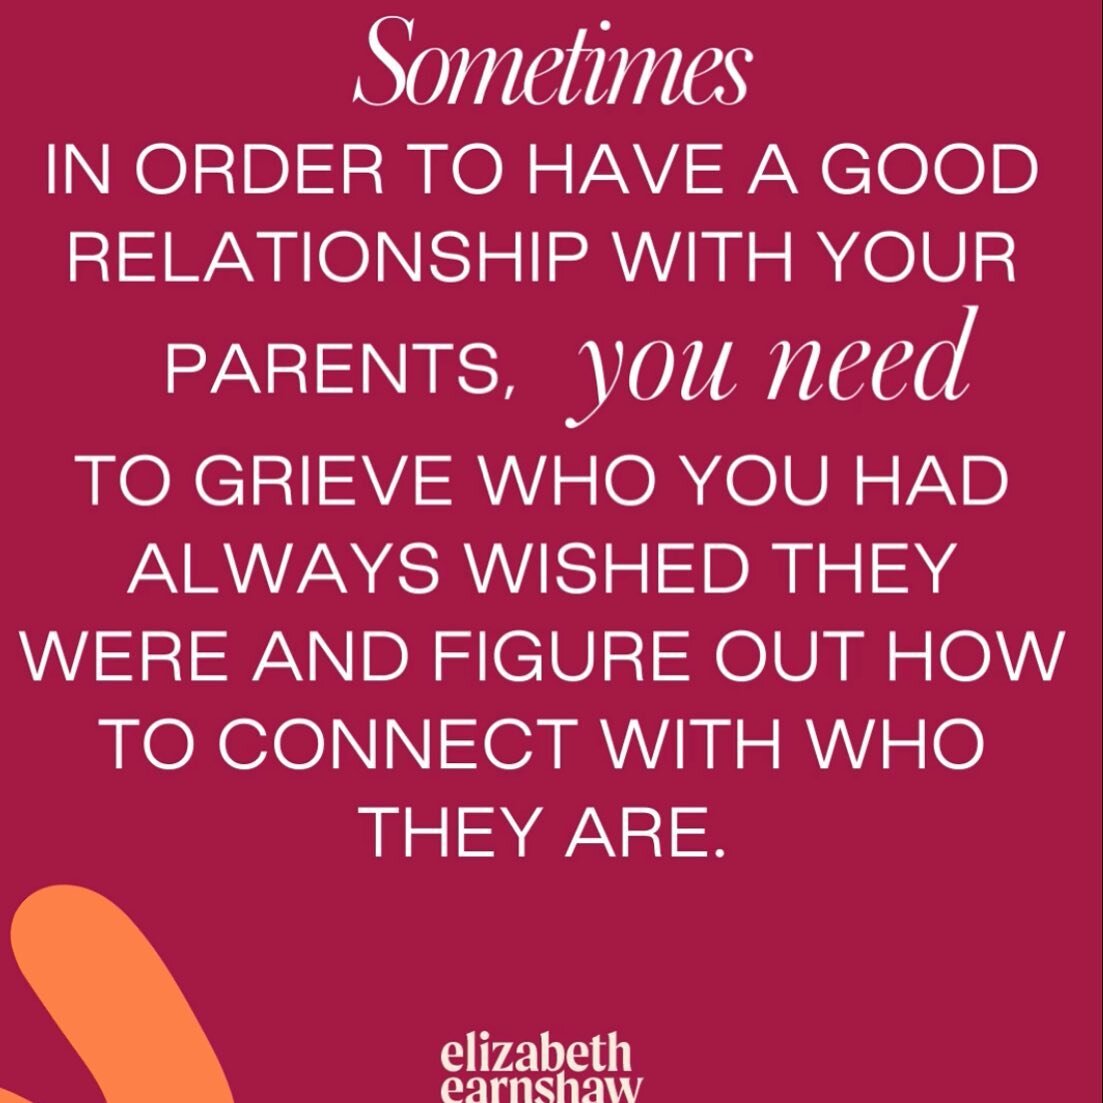 In my work as a therapist, I&rsquo;ve met with a lot of young adult clients who are saddened that the relationship they have with their parents is mediocre.

For this particular type of issue, it&rsquo;s  not that the relationship is terrible, but it